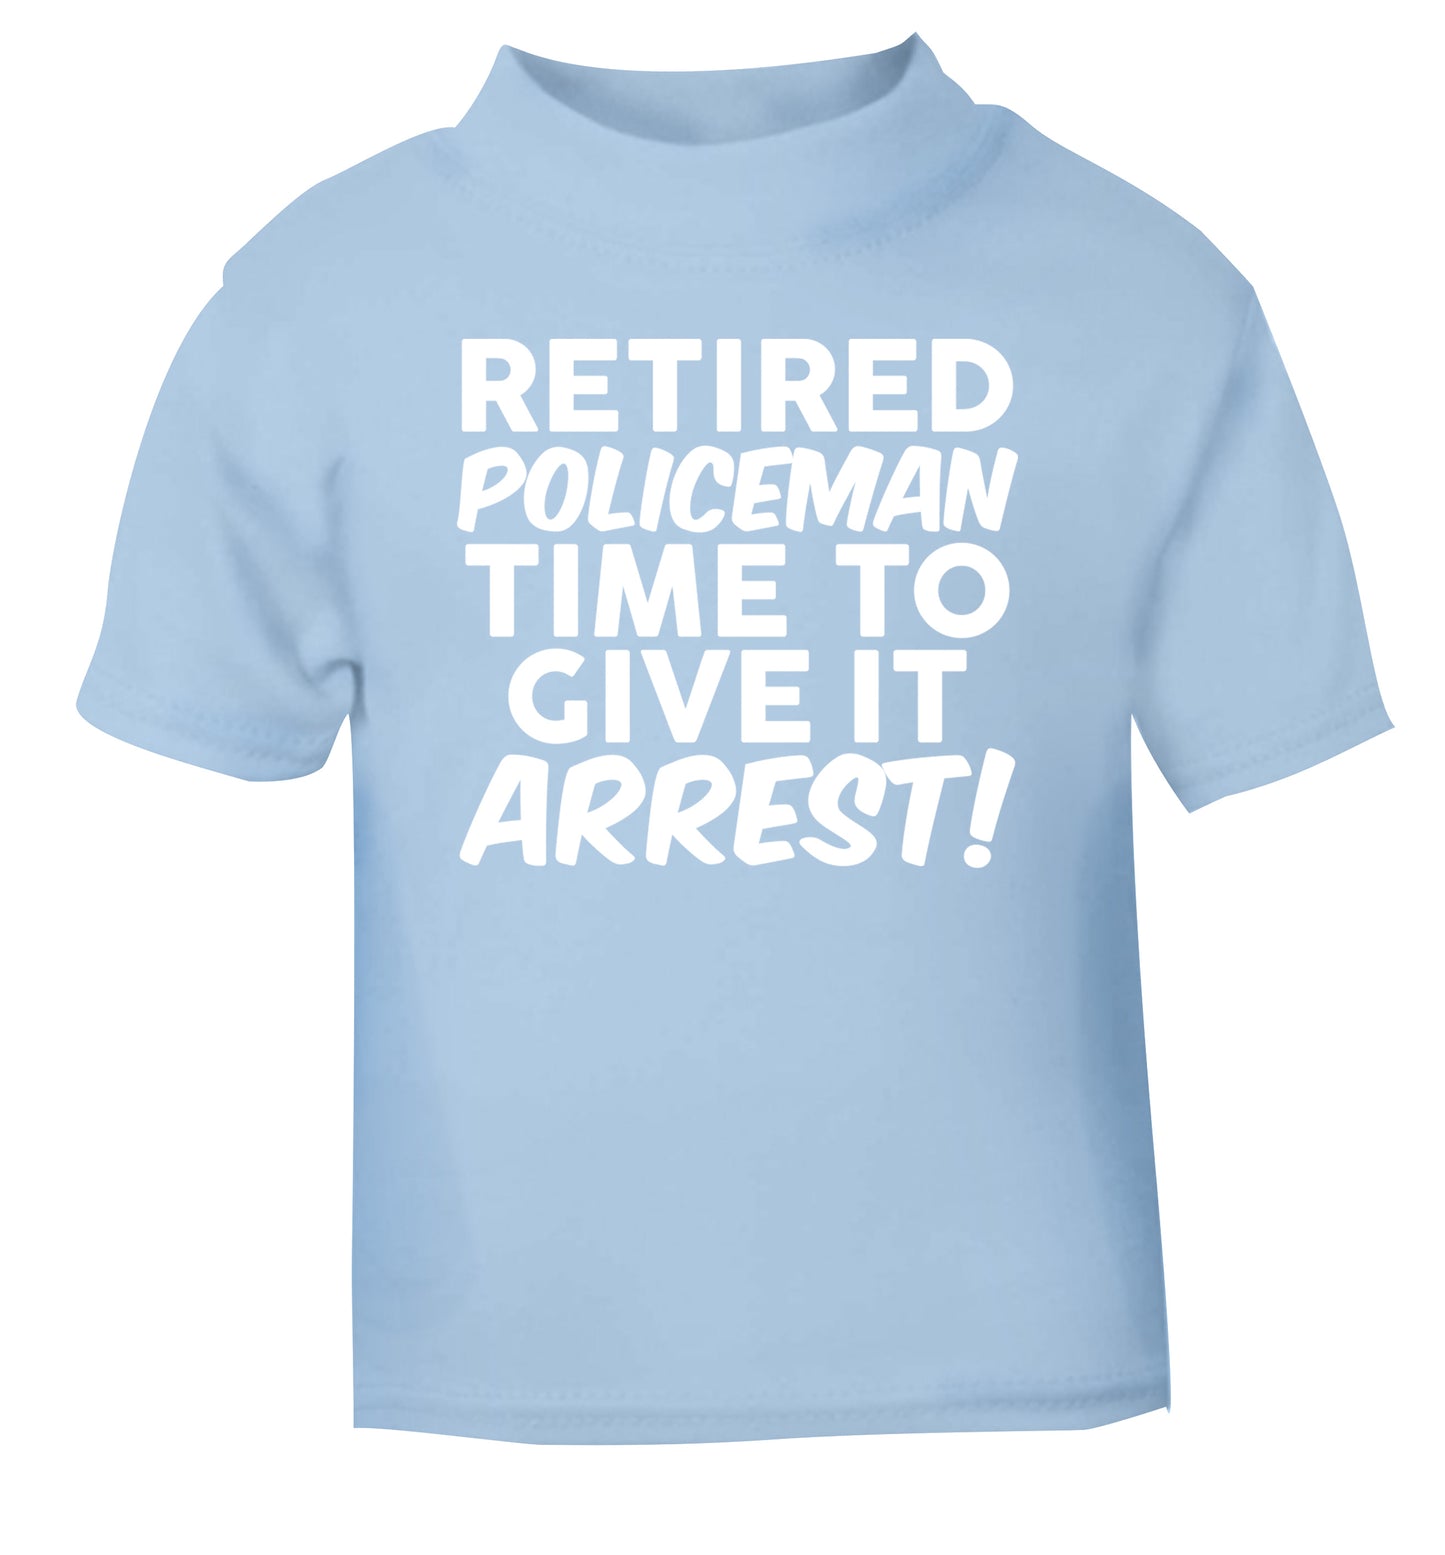 Retired policeman give it arresst! light blue Baby Toddler Tshirt 2 Years